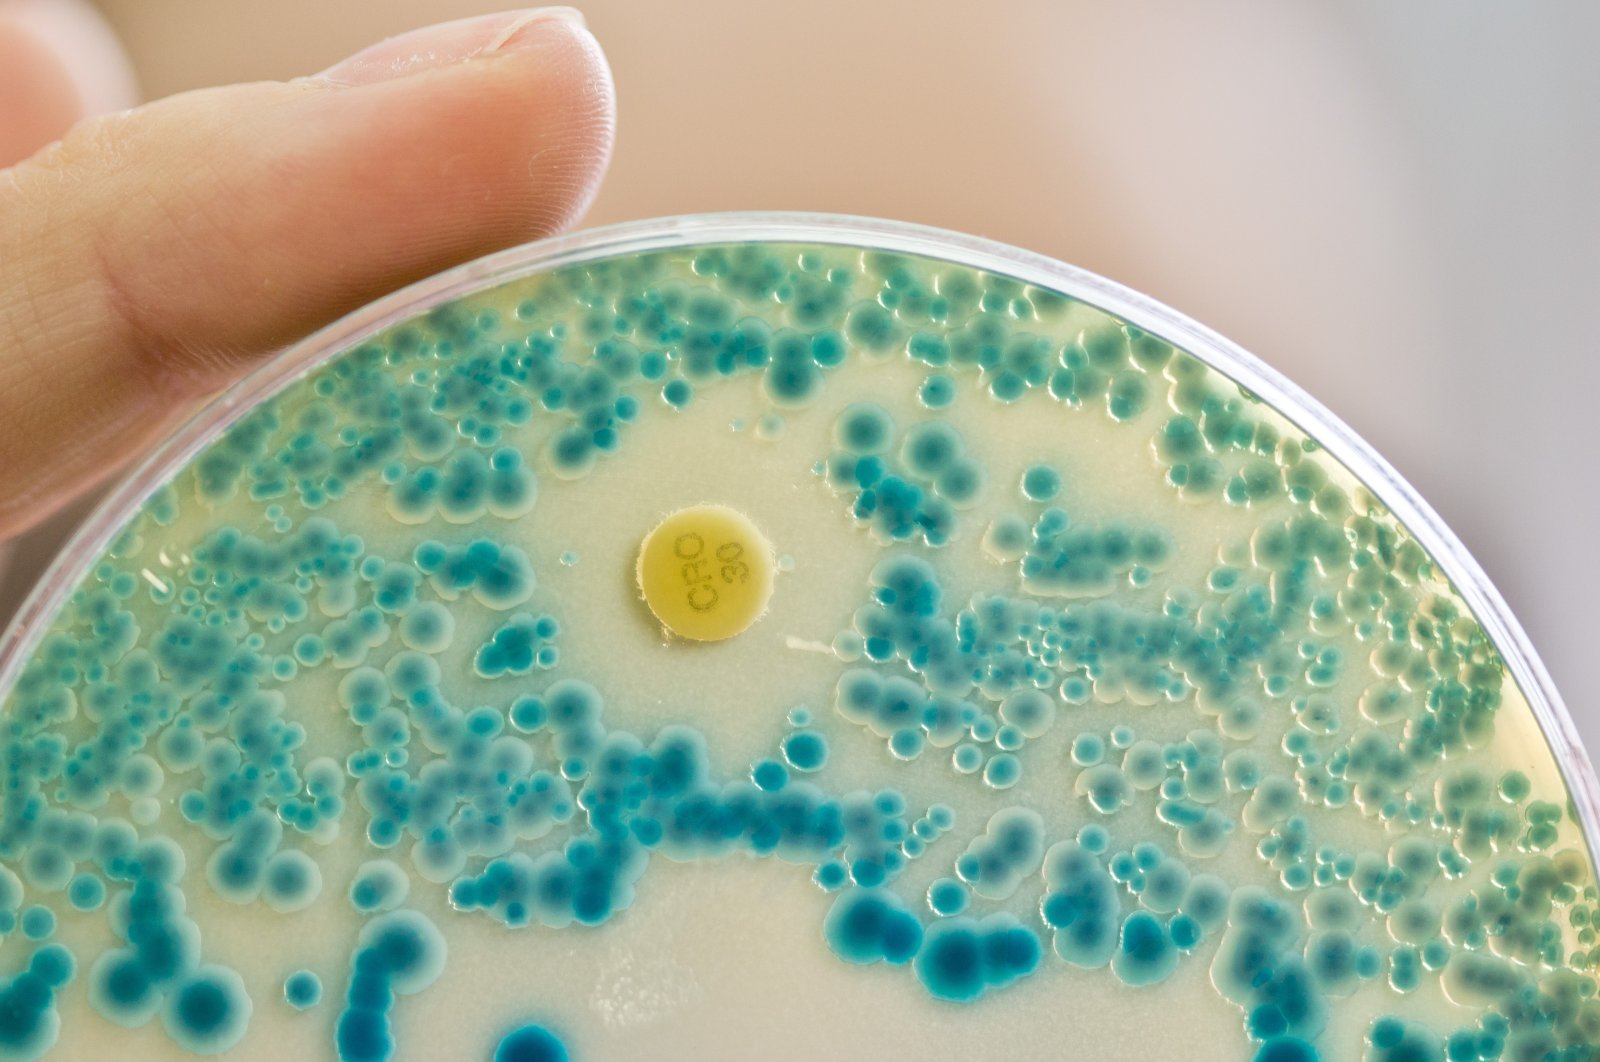 A laboratory employee holds an indicator culture plate for the detection of resistant bacteria, in Bavaria, Erlangen, Germany, July 21, 2015. (Getty Images Photo)